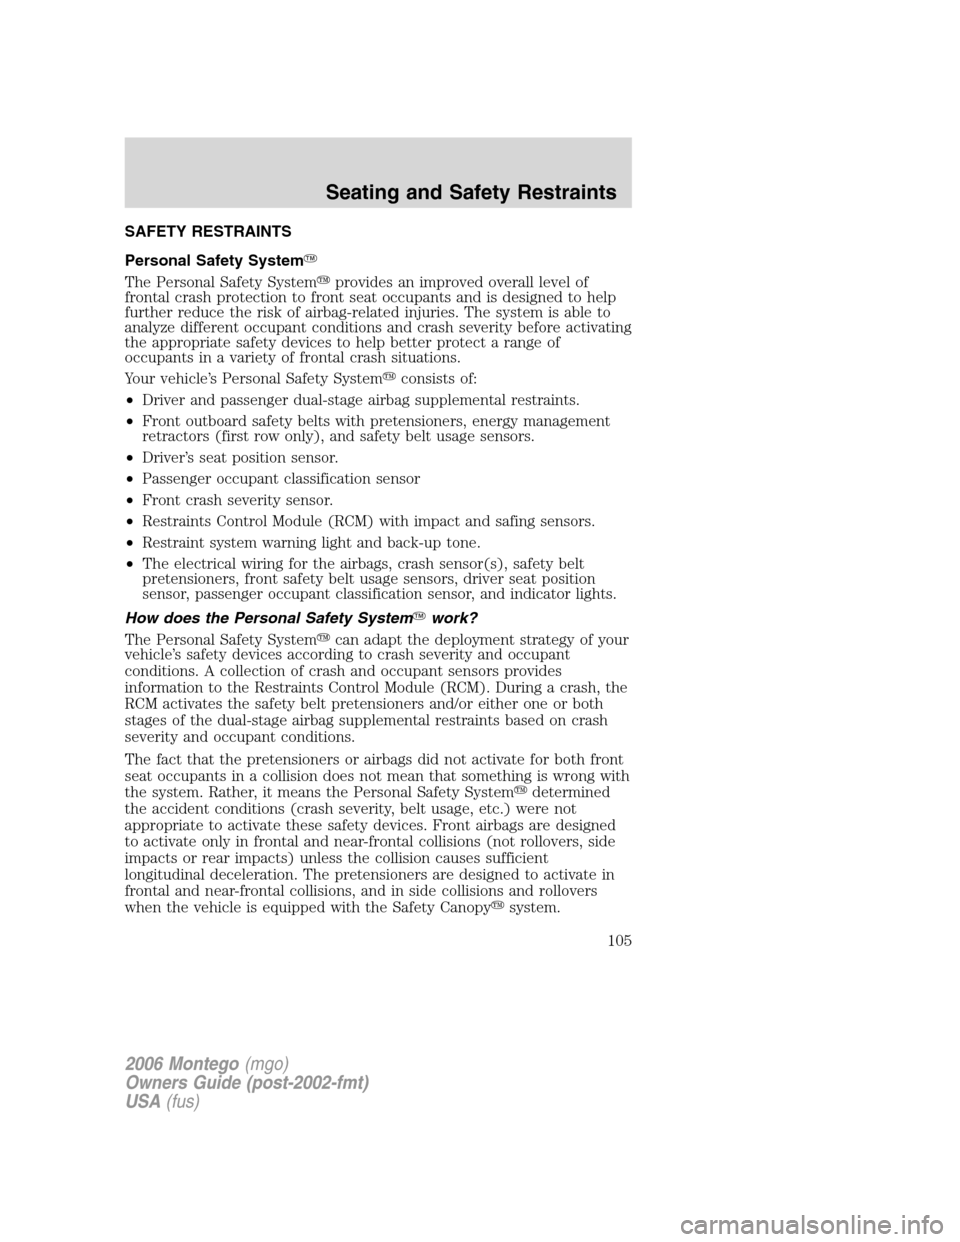 Mercury Montego 2006  Owners Manuals SAFETY RESTRAINTS
Personal Safety System
The Personal Safety Systemprovides an improved overall level of
frontal crash protection to front seat occupants and is designed to help
further reduce the r